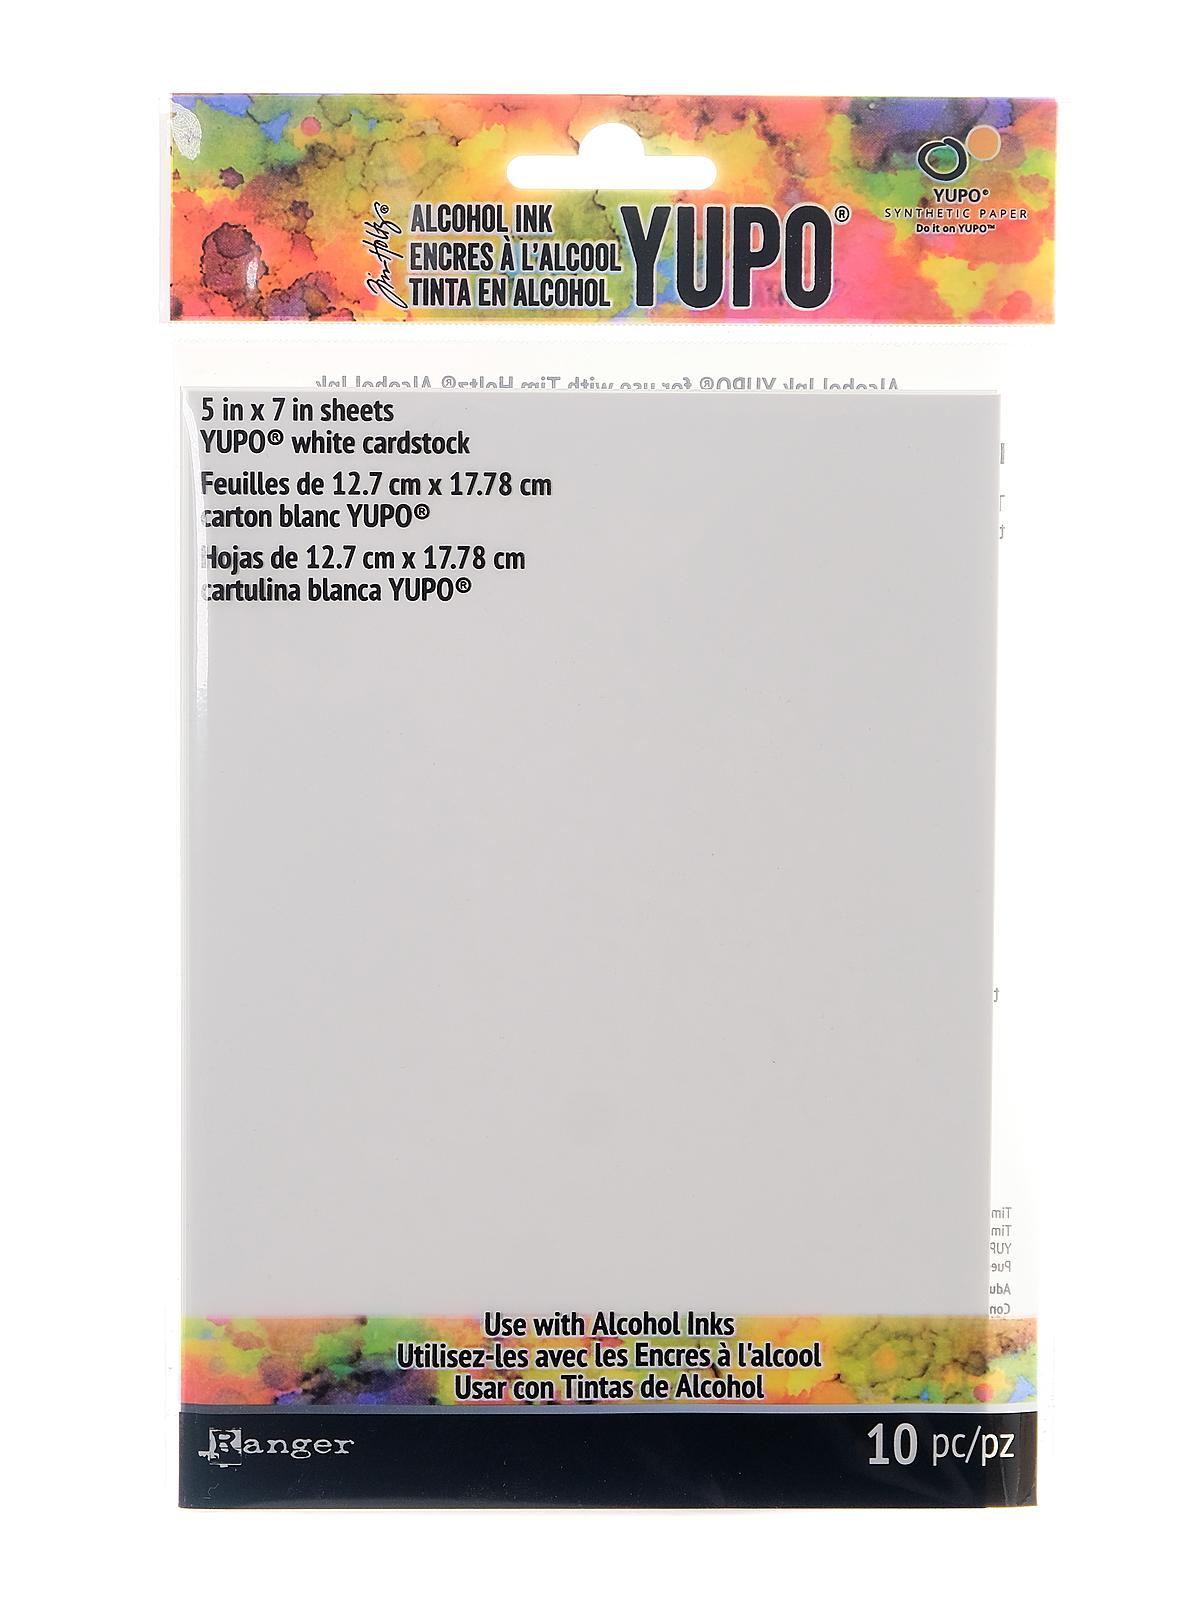 Tim Holtz Alcohol Ink YUPO Translucent Cardstock Smooth Finish Synthetic Paper